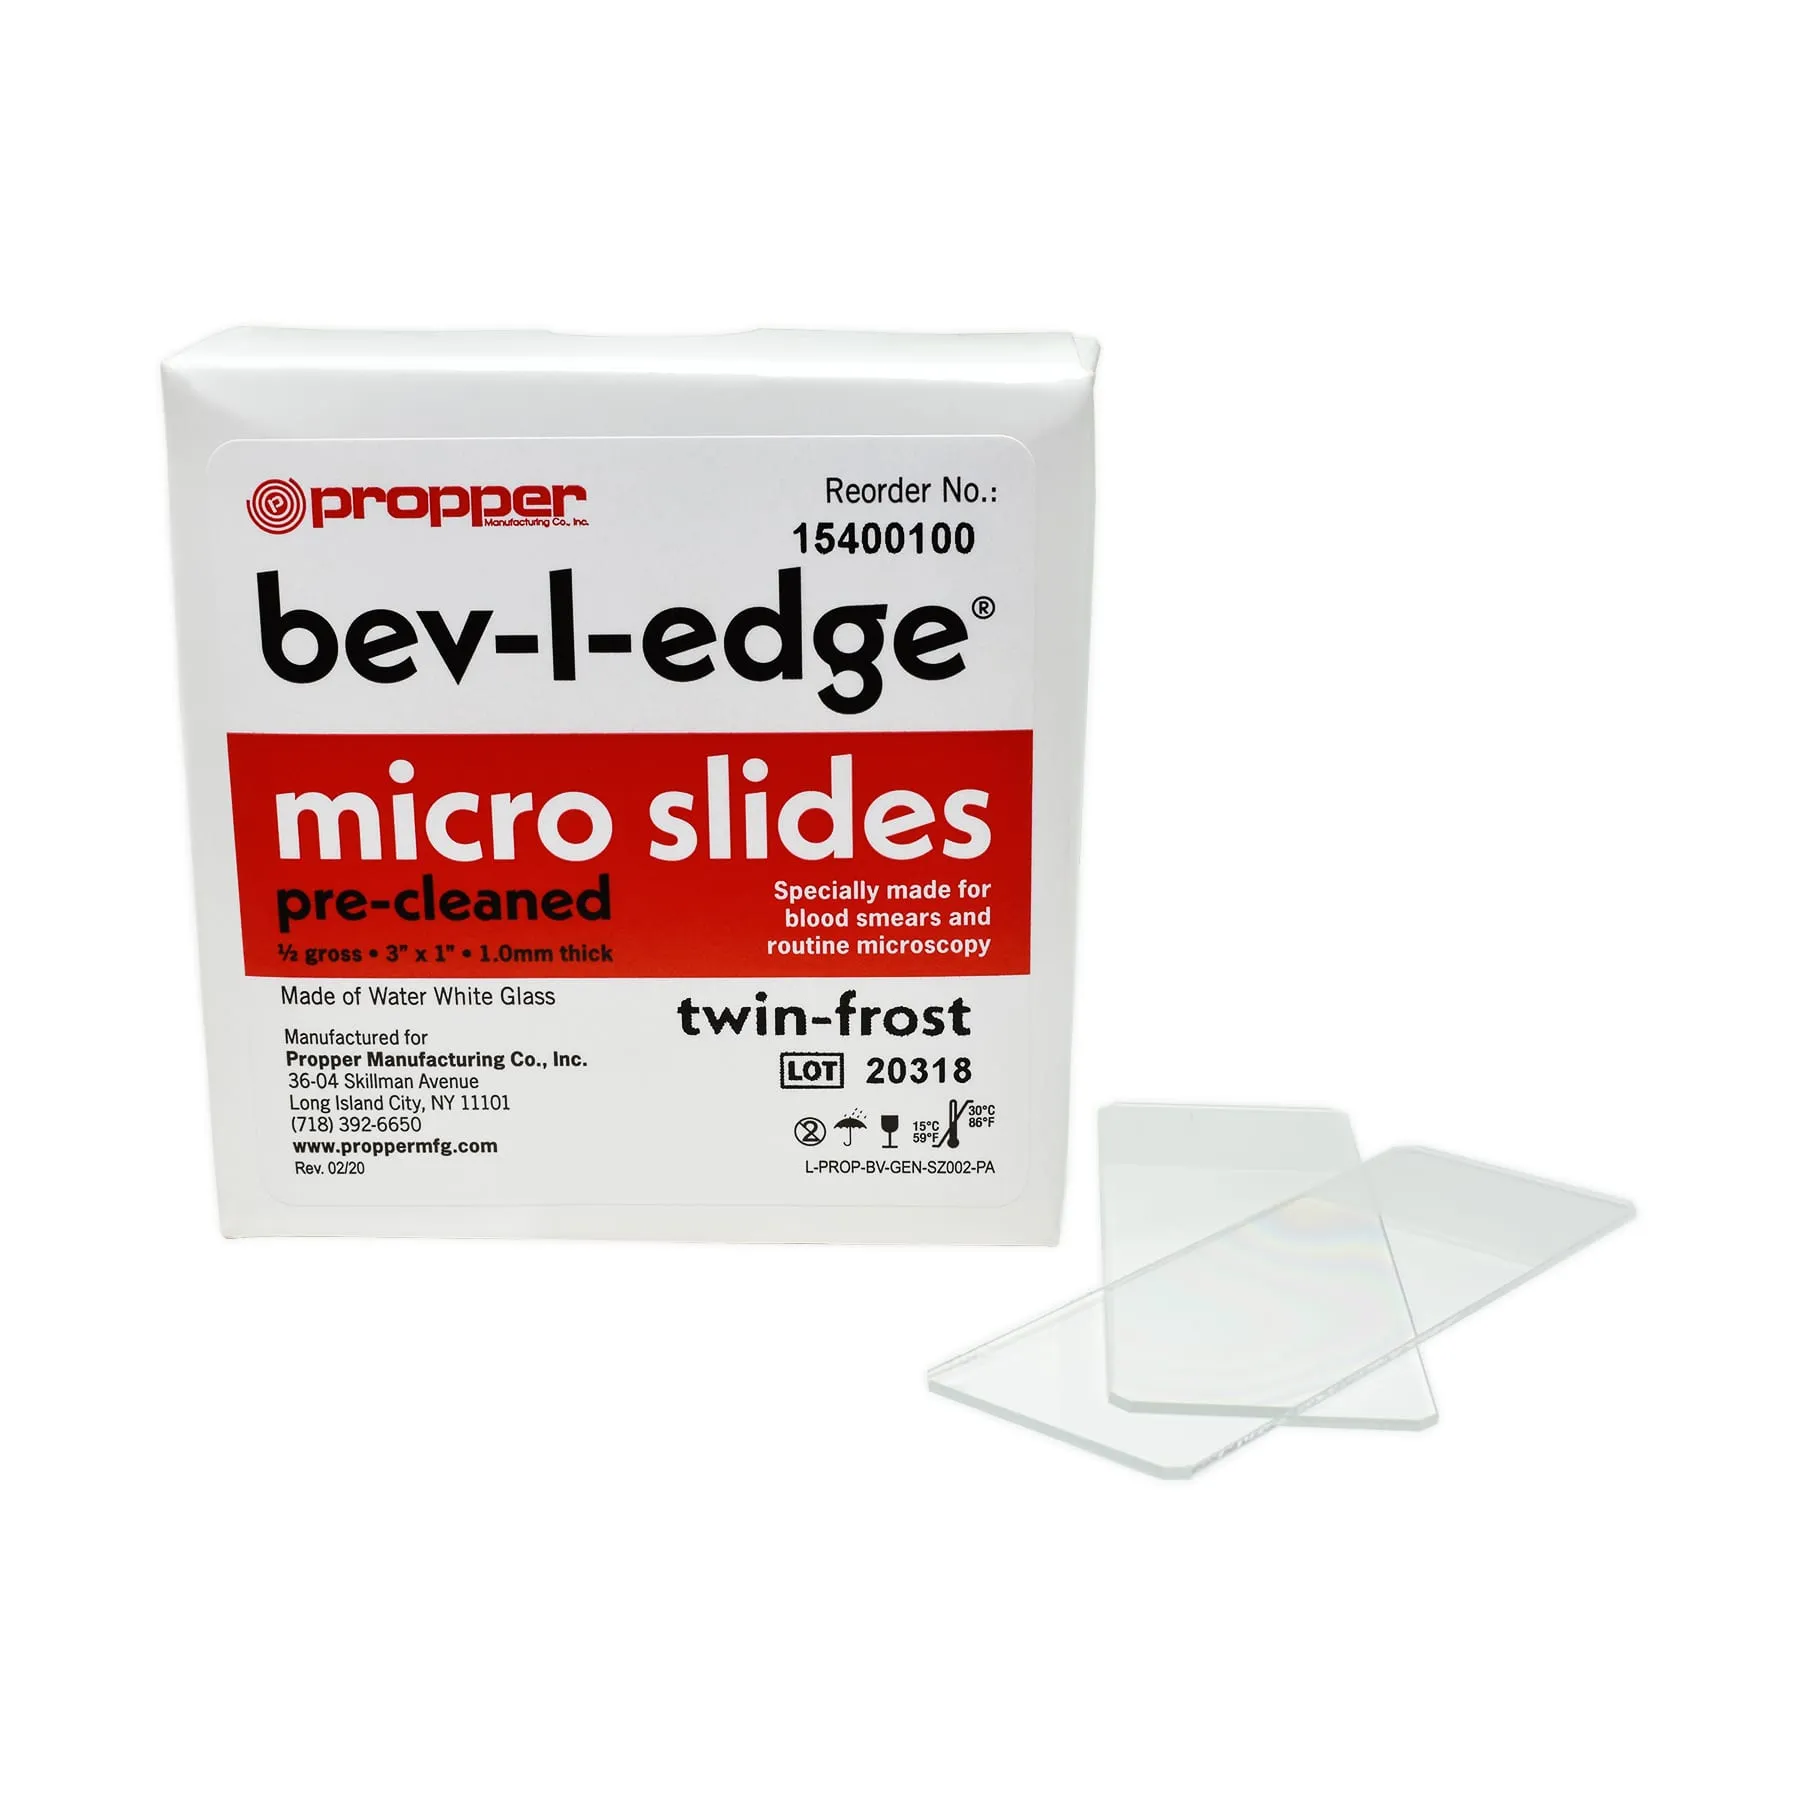 Propper - From: 15300100 To: 15400100 - Manufacturing Bev l edge Microscope Slides